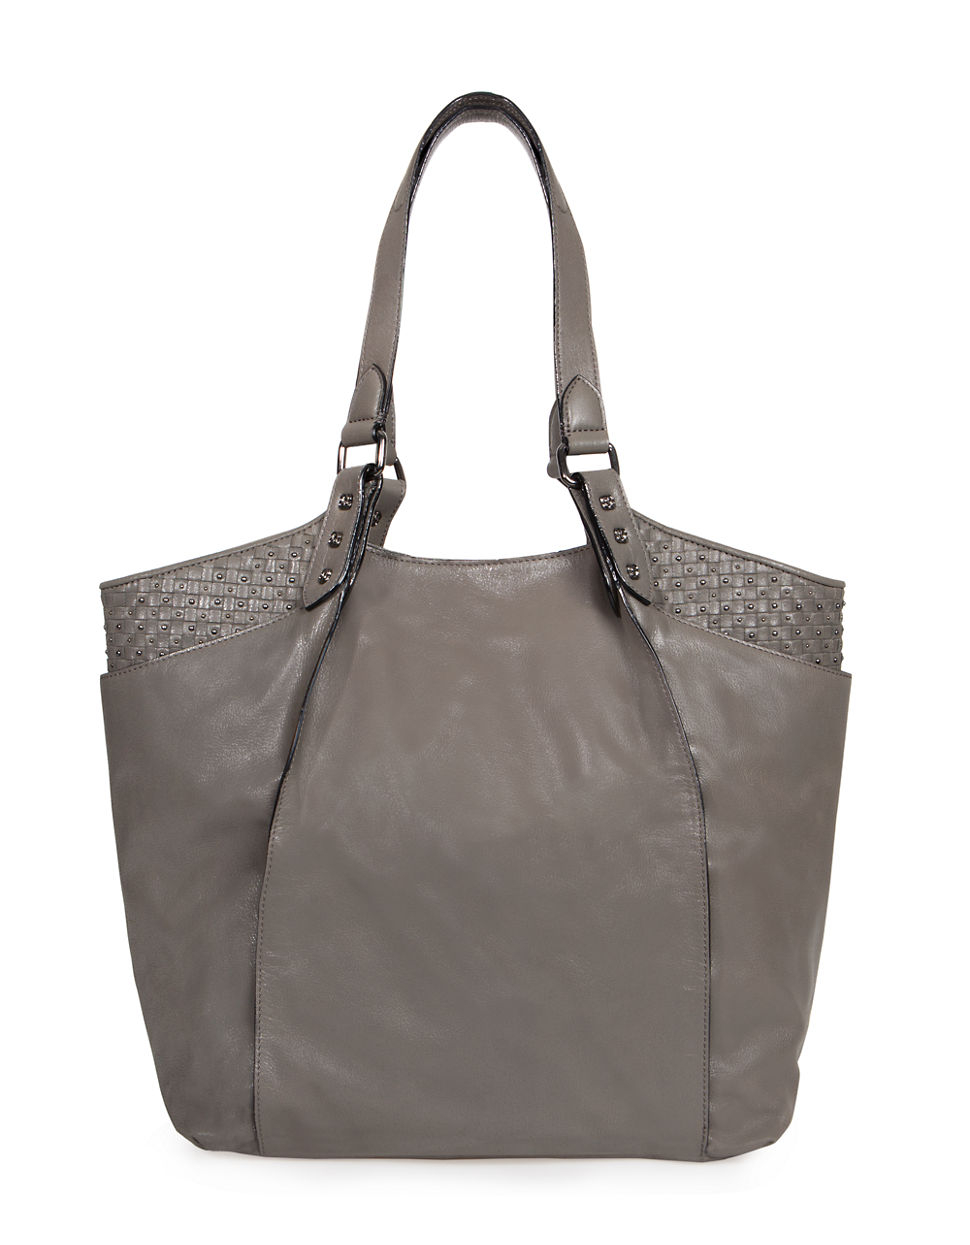 Elliott lucca Messina Leather Carry All Tote Bag in Gray | Lyst